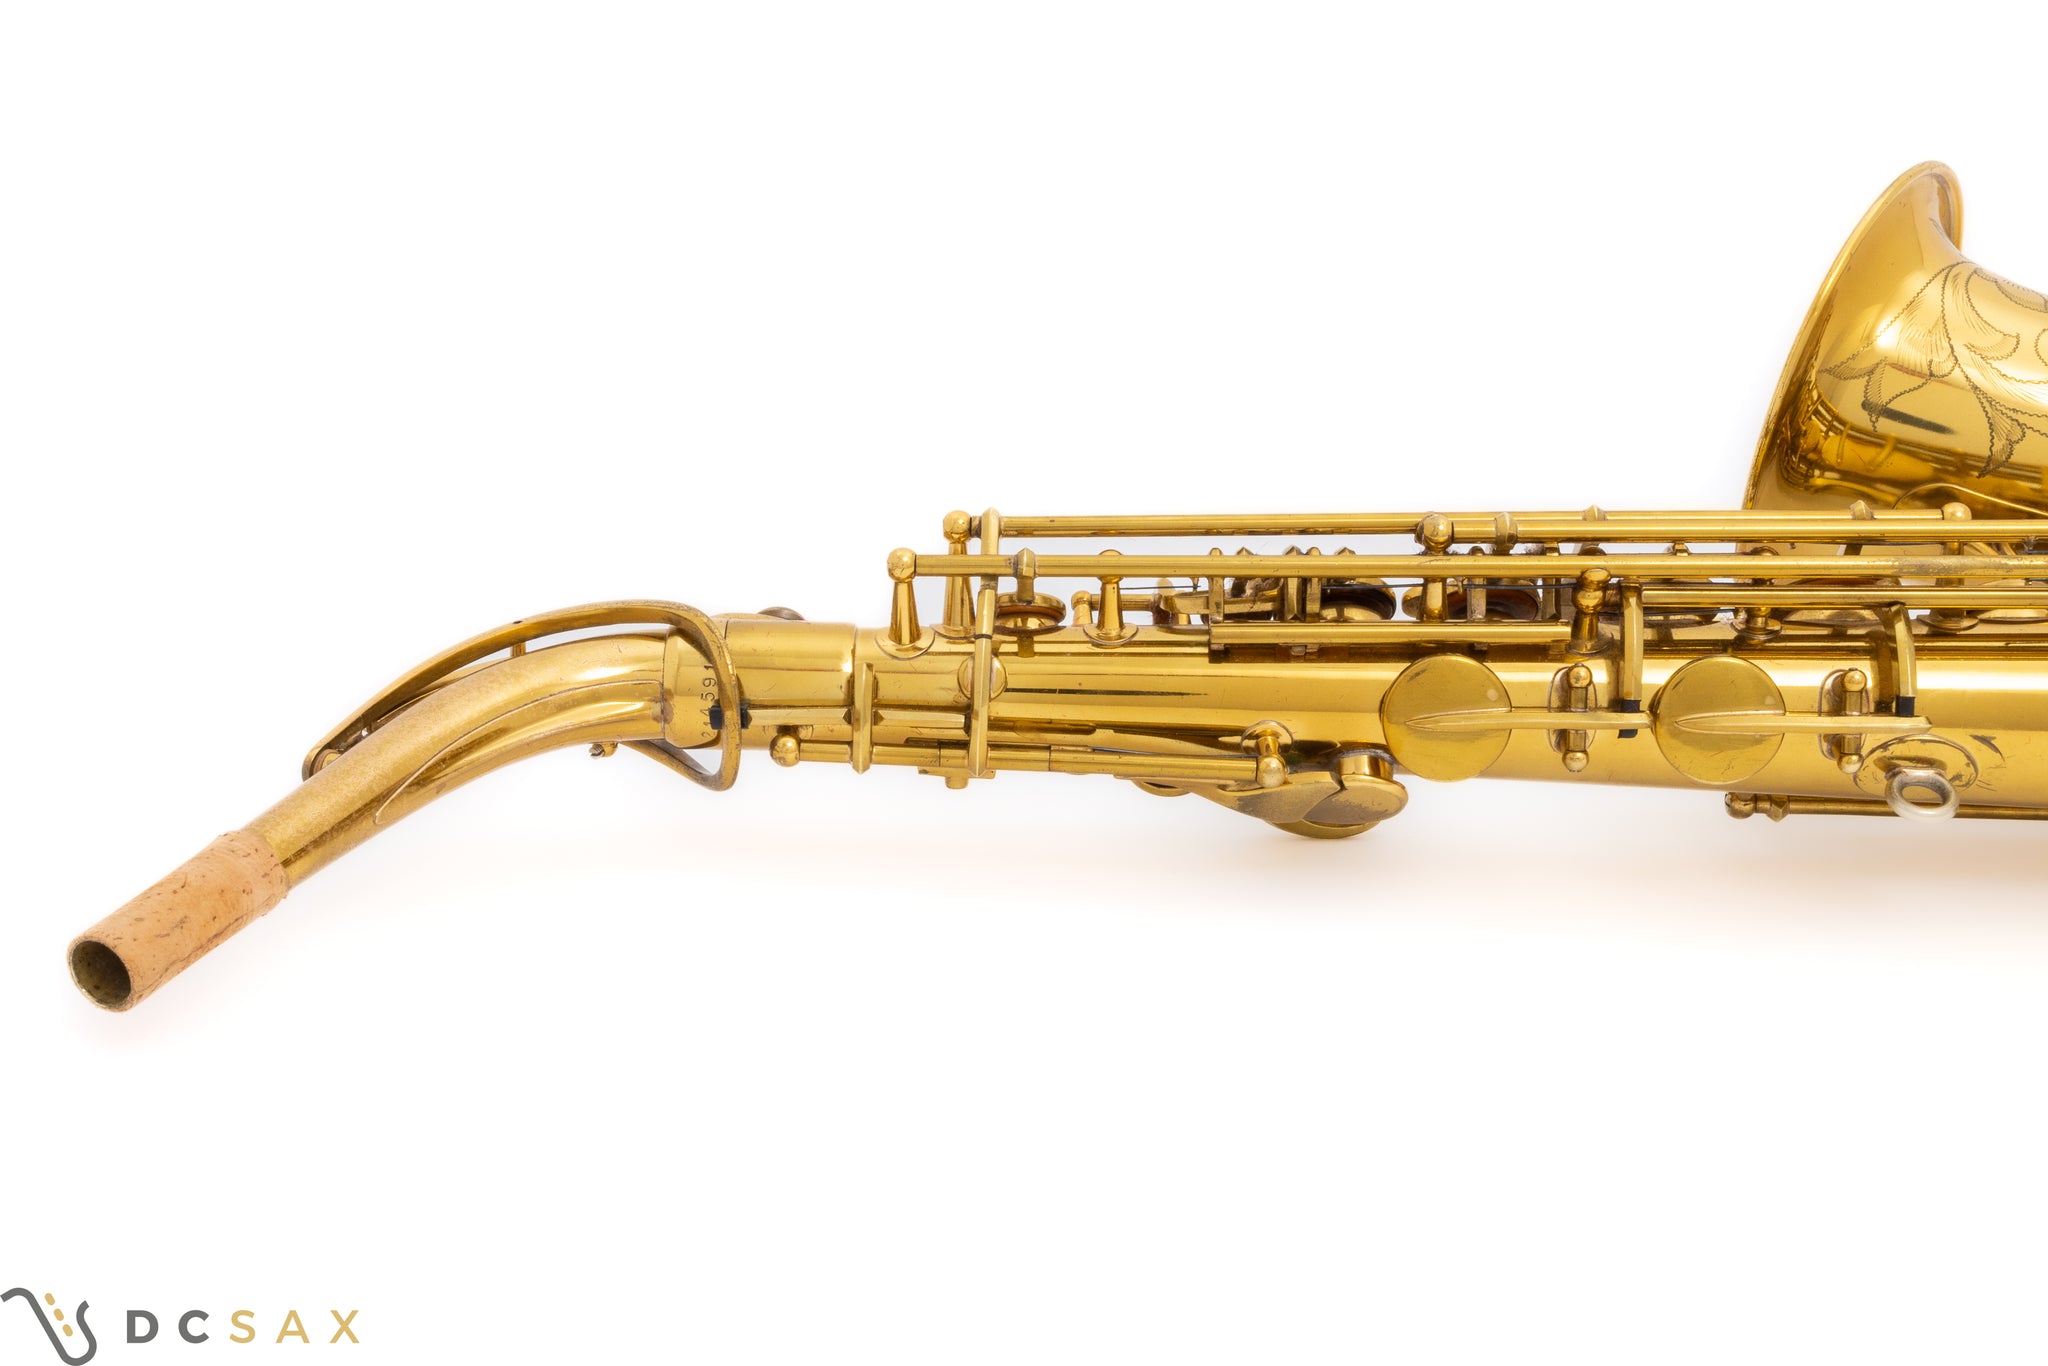 Martin Committee "Official Music Man Model" Alto Saxophone, 99% Origingal Lacquer, Video